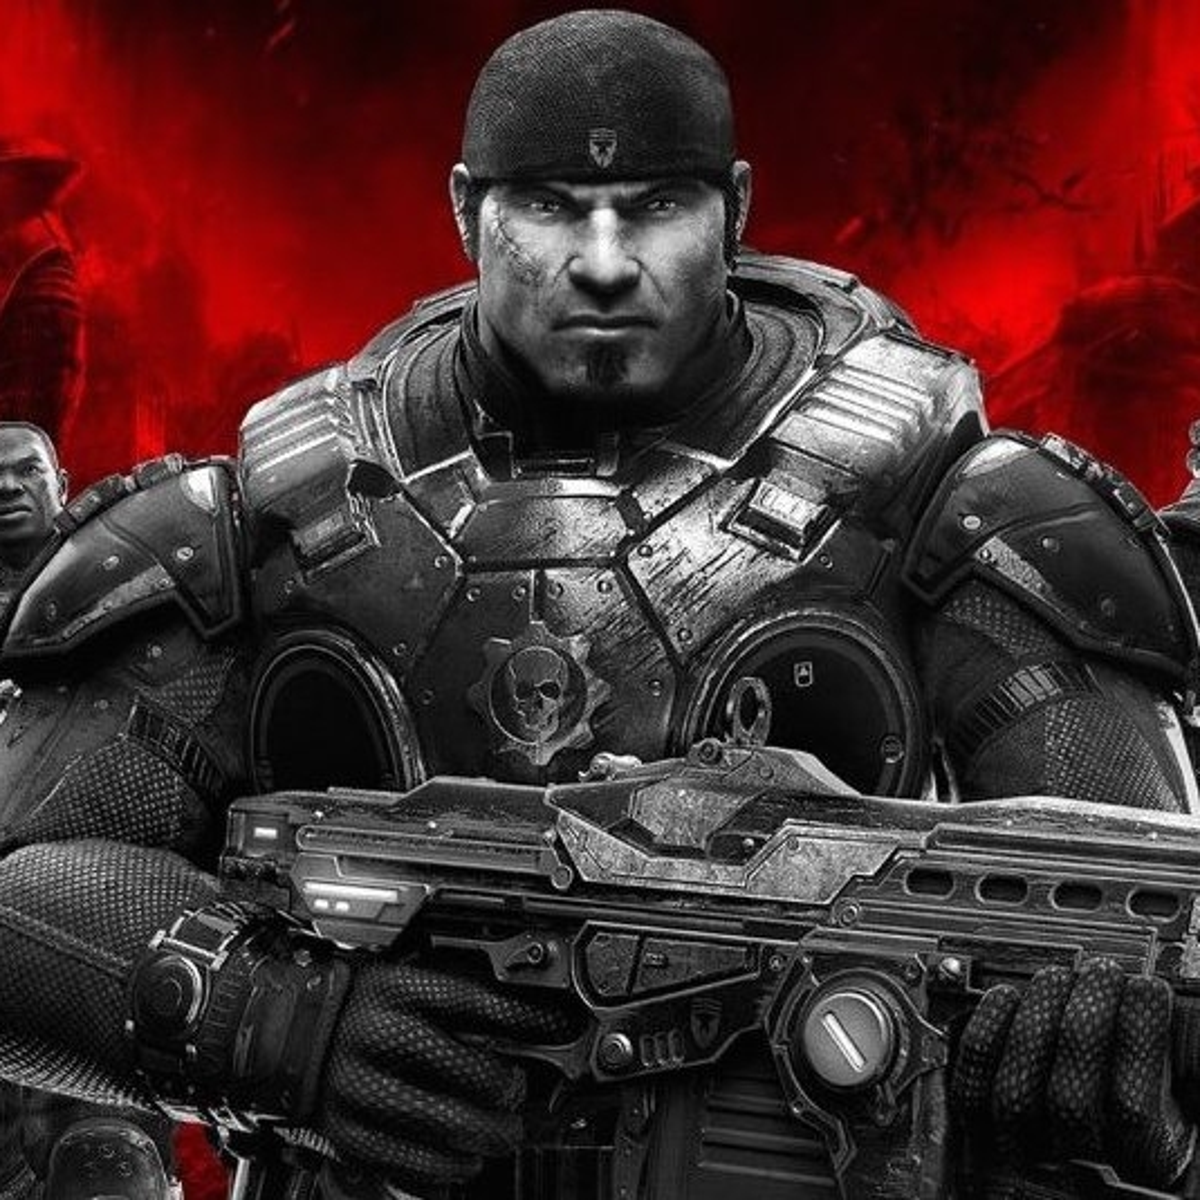 The making of Gears of War: Ultimate Edition